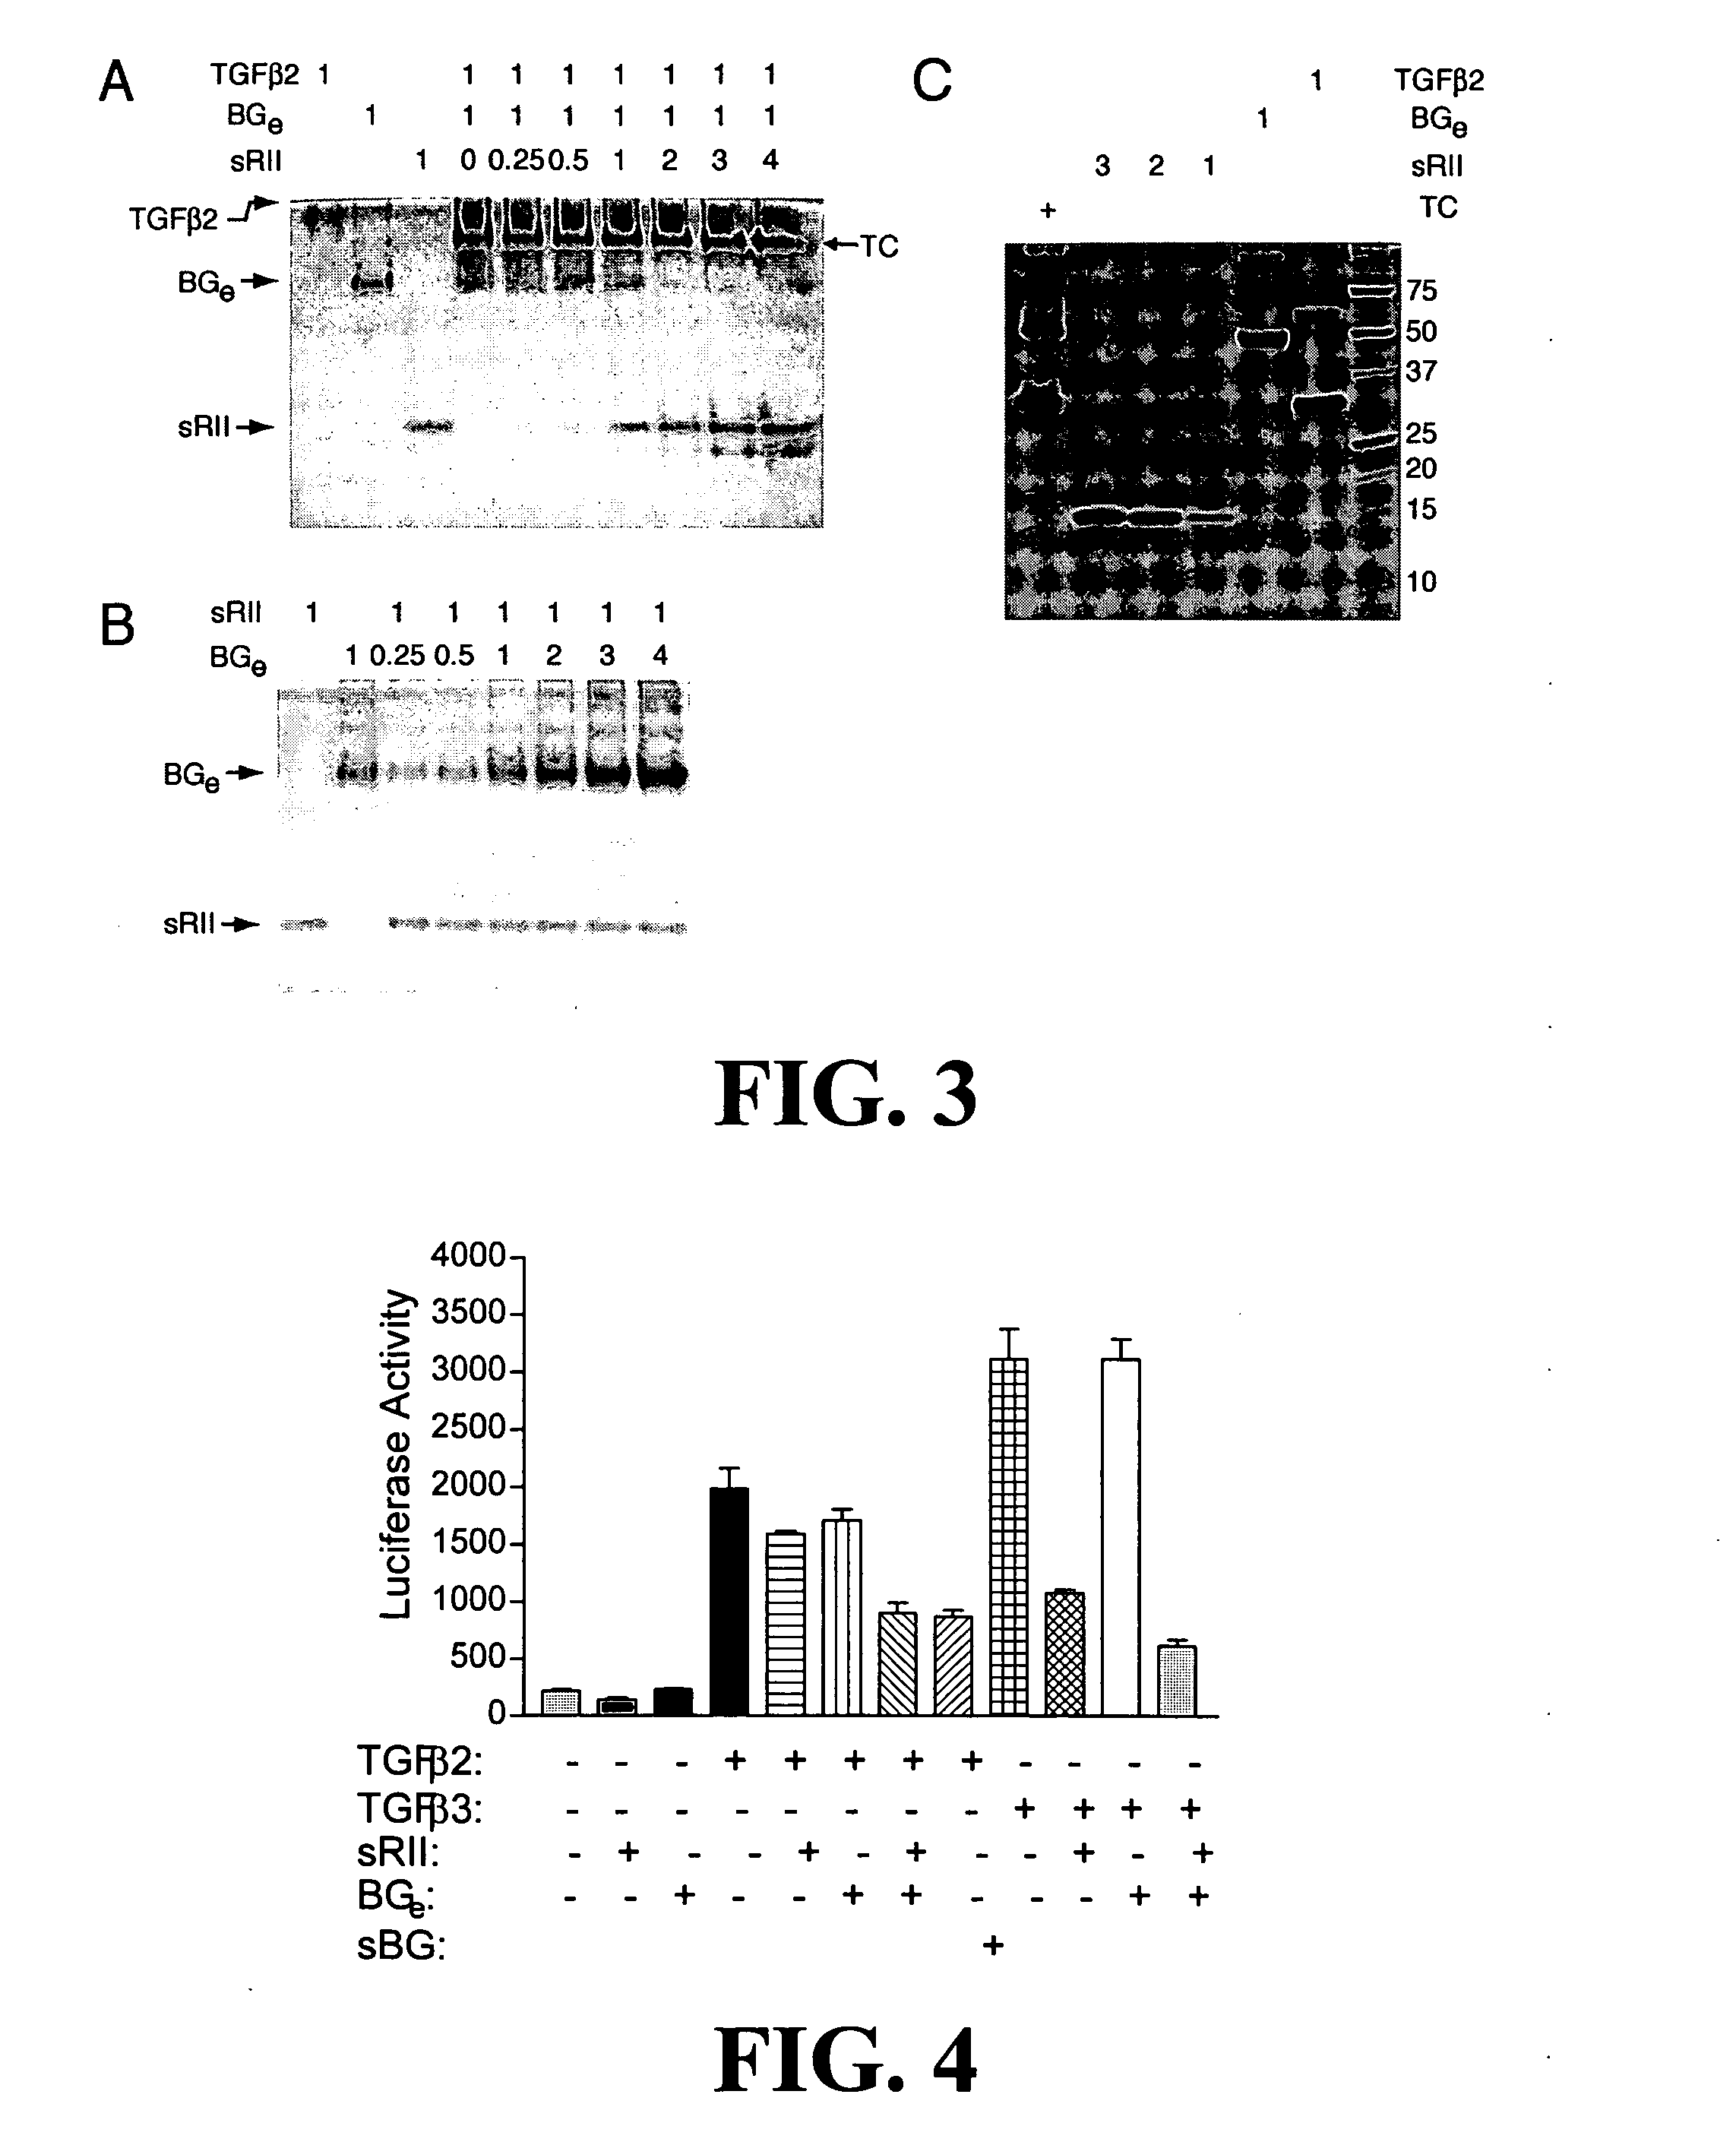 Antagonizing TGF-beta activity with various ectodomains of TGF-beta receptors used in combination or as fusion proteins